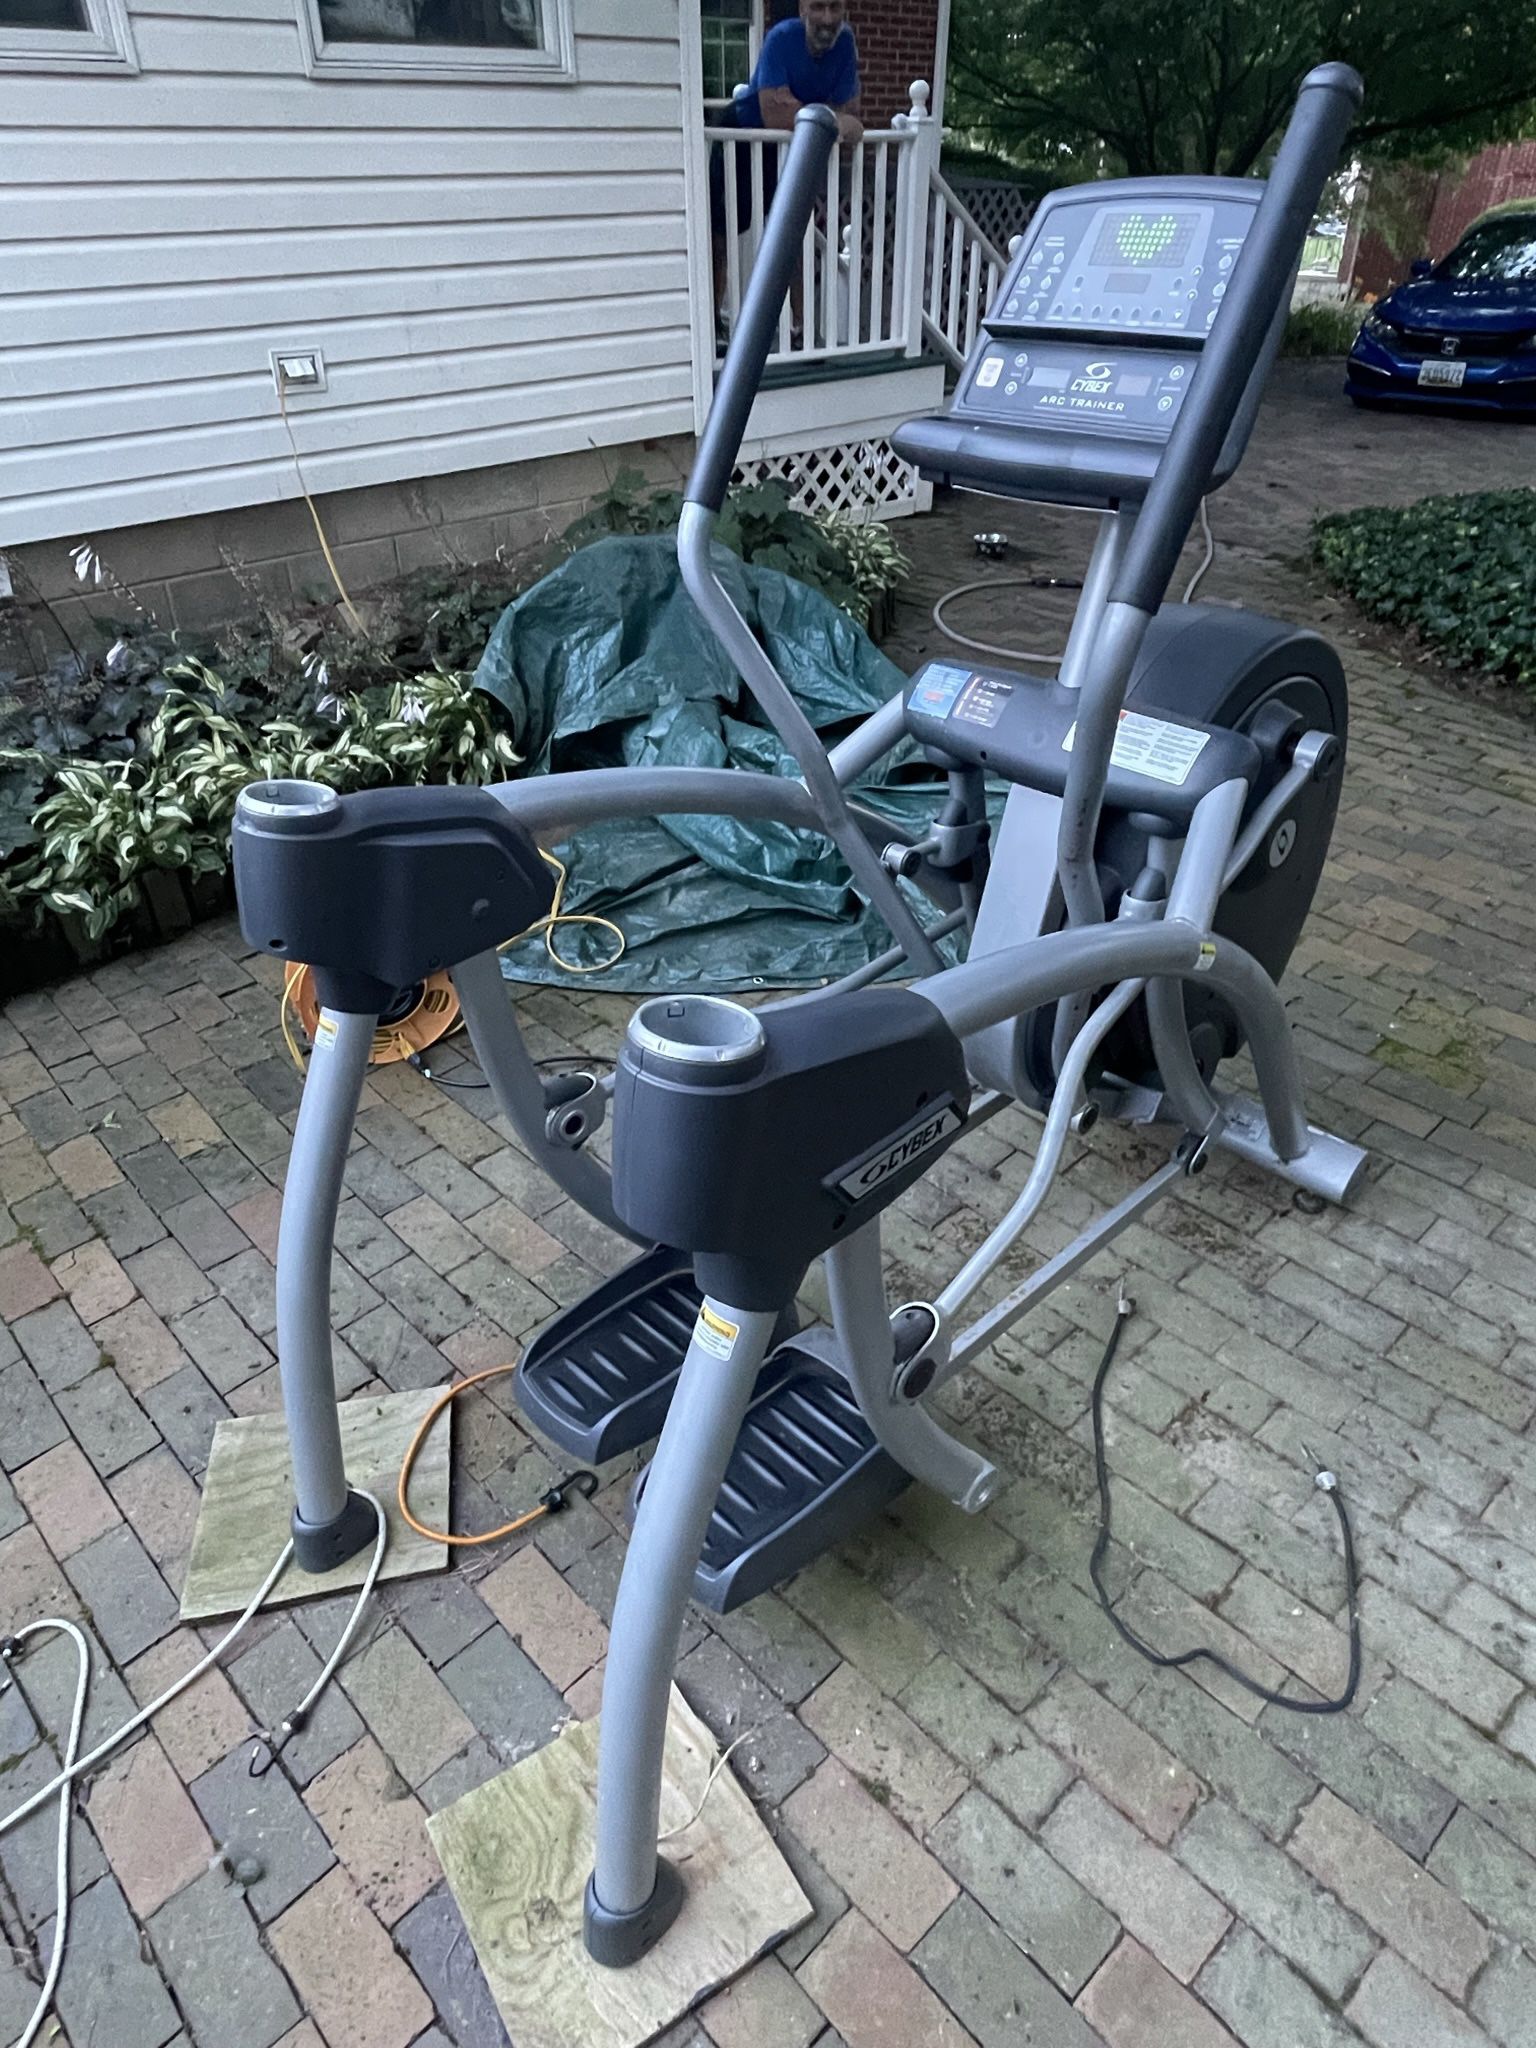 Cybex Home Arc Trainer